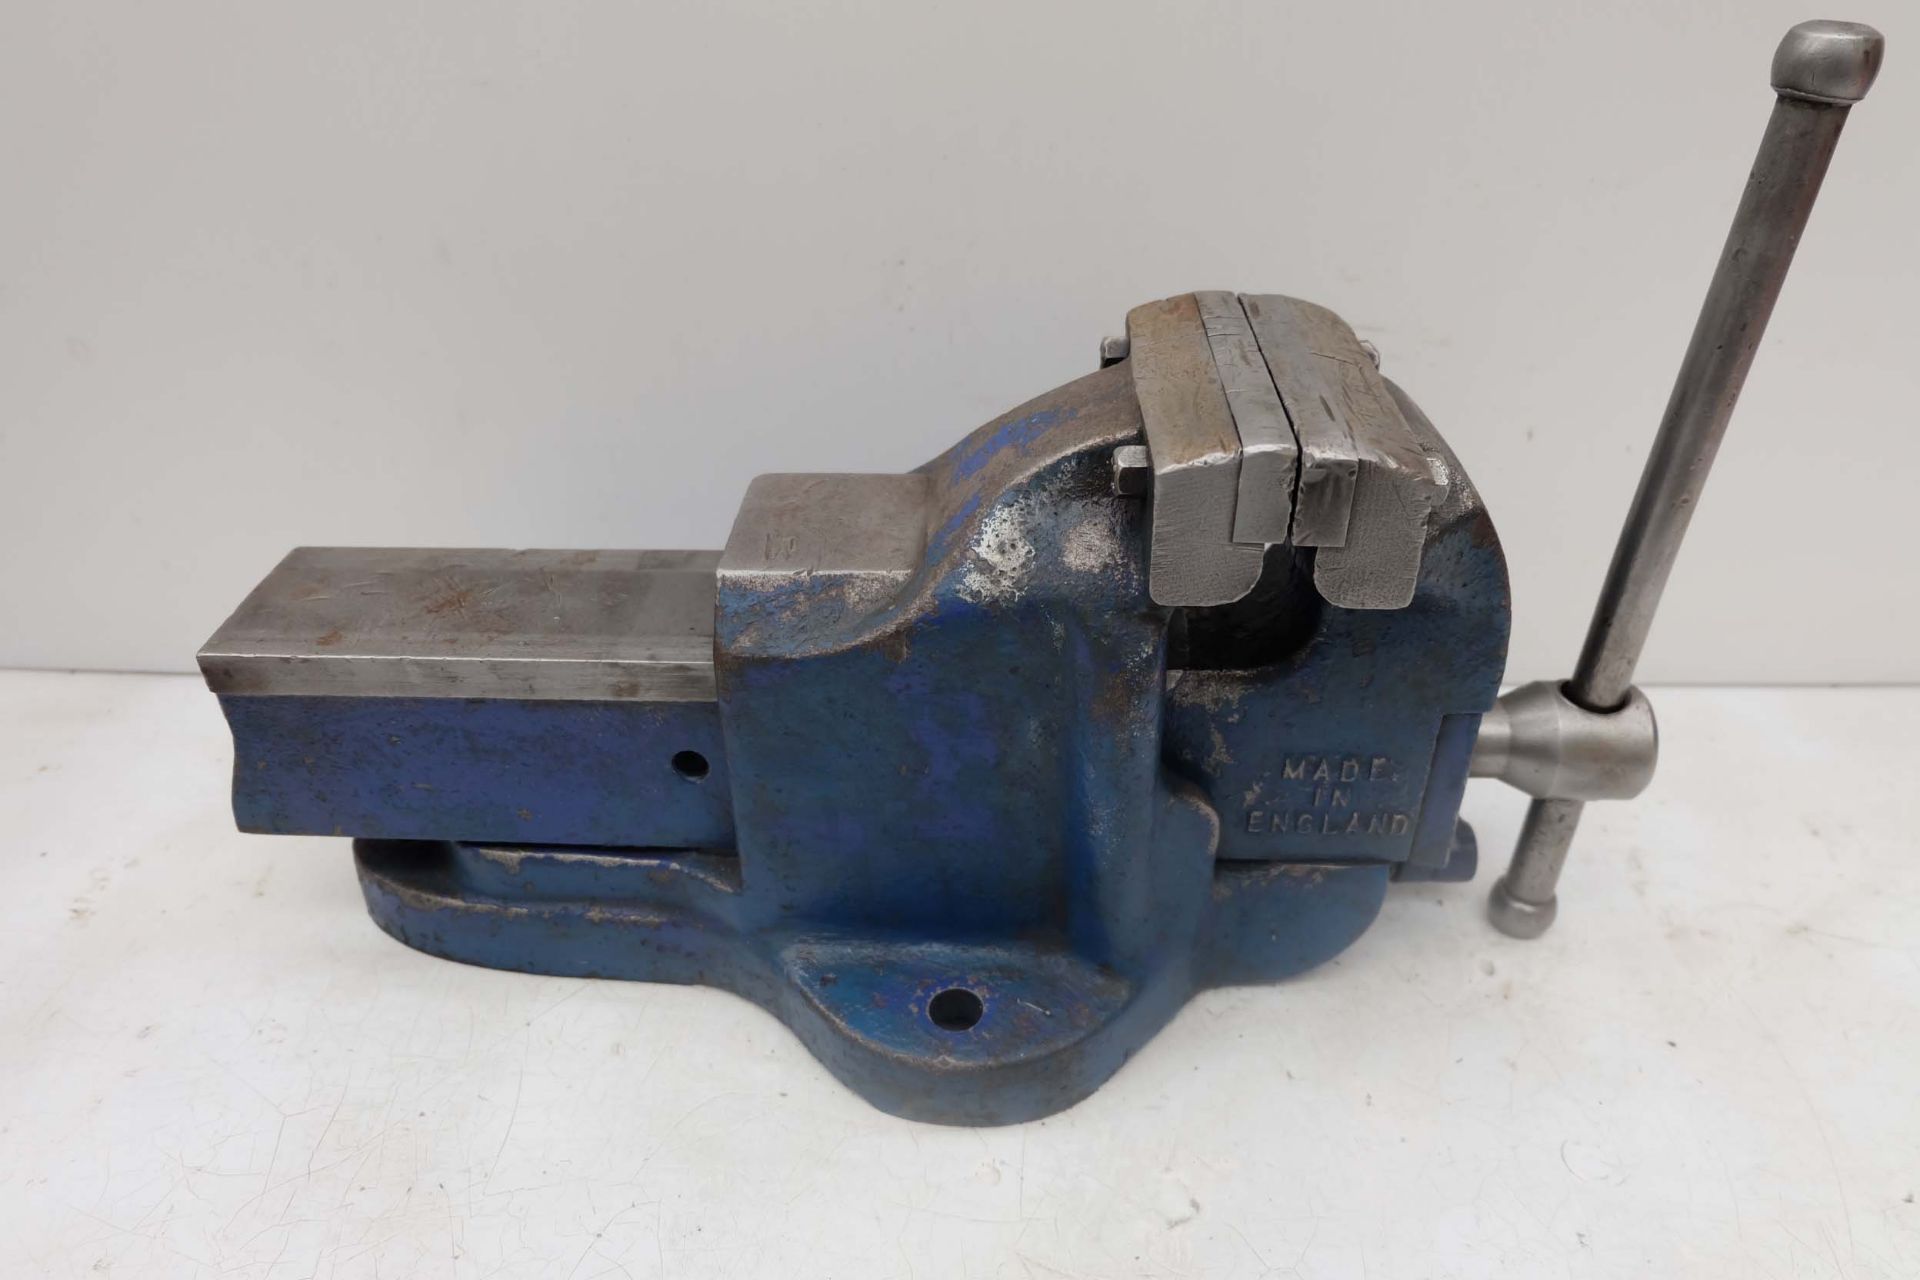 Record 84 - 34 Engineers Bench Vice. Width of Jaws 4 1/2". Maximum Opening 6". With Quick Release. - Image 6 of 6